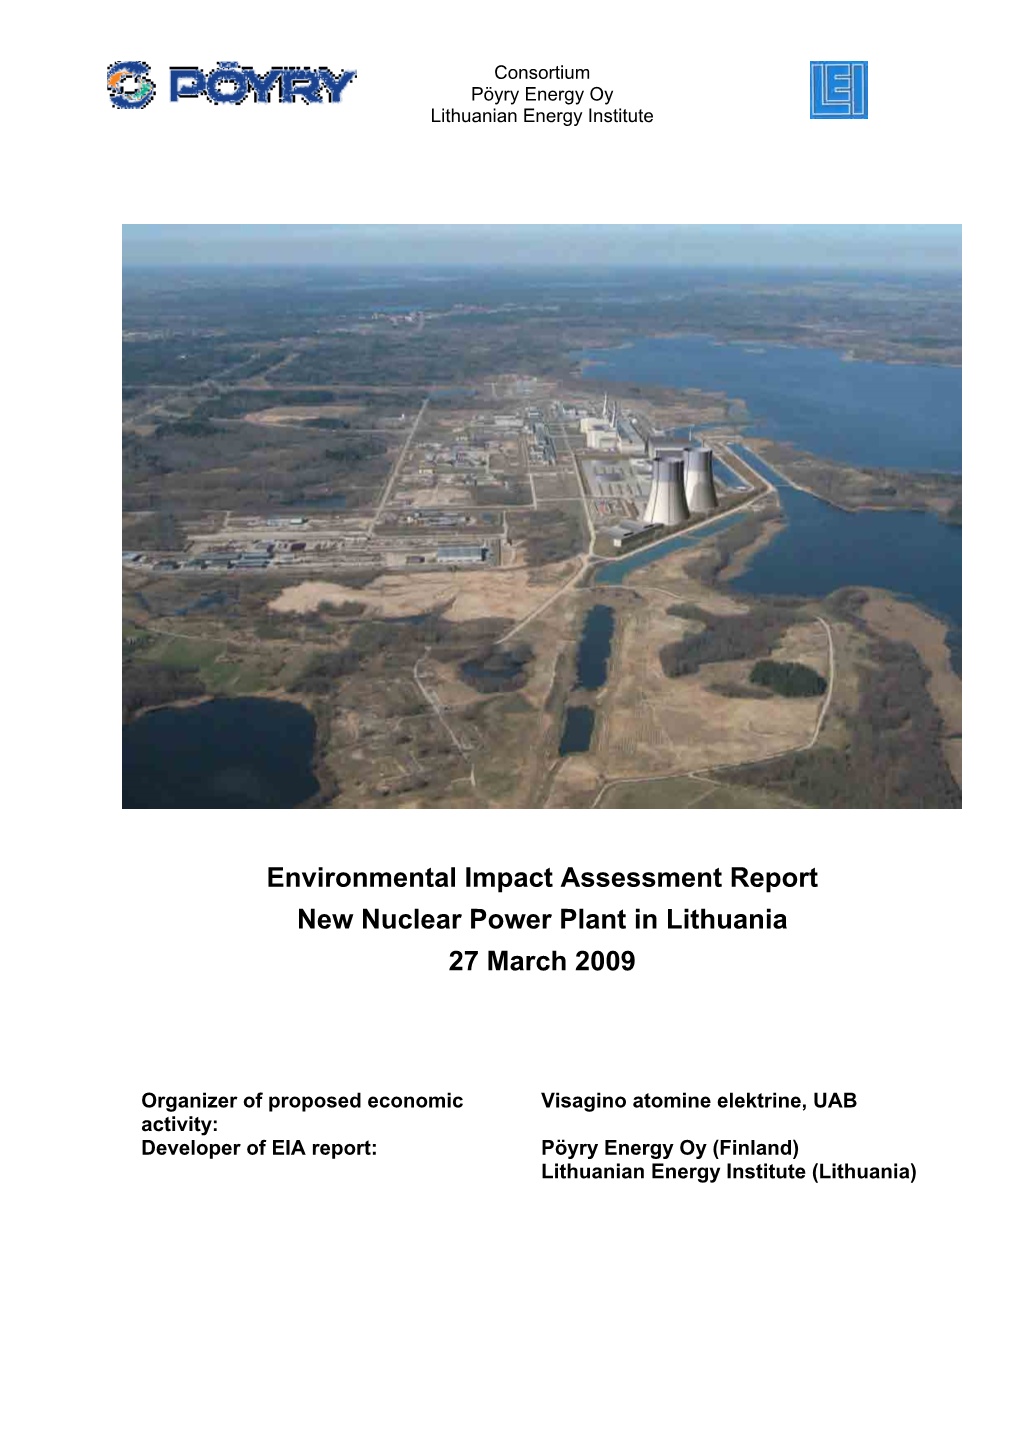 Environmental Impact Assessment Report New Nuclear Power Plant in Lithuania 27 March 2009